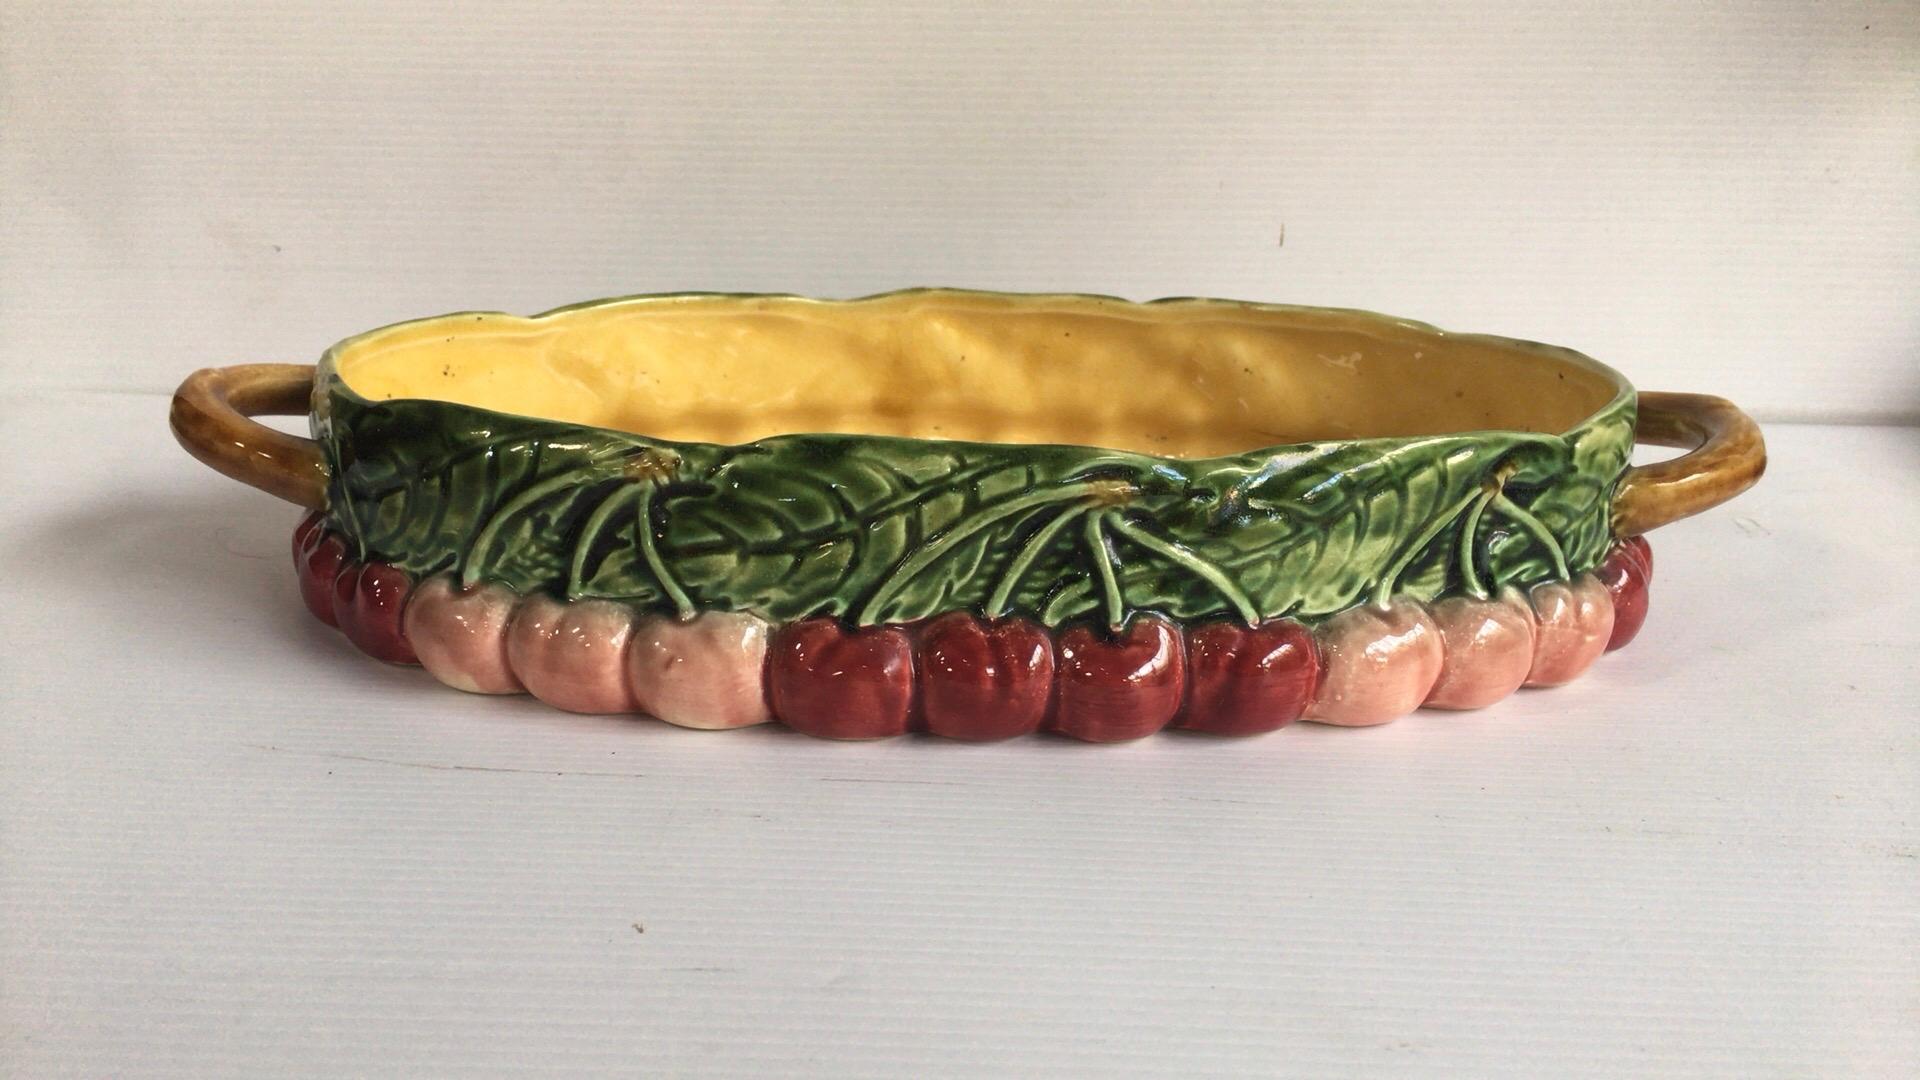 Majolica Cherries oval basket signed Sarreguemines, circa 1920.
Lenght / 14.3 on 8